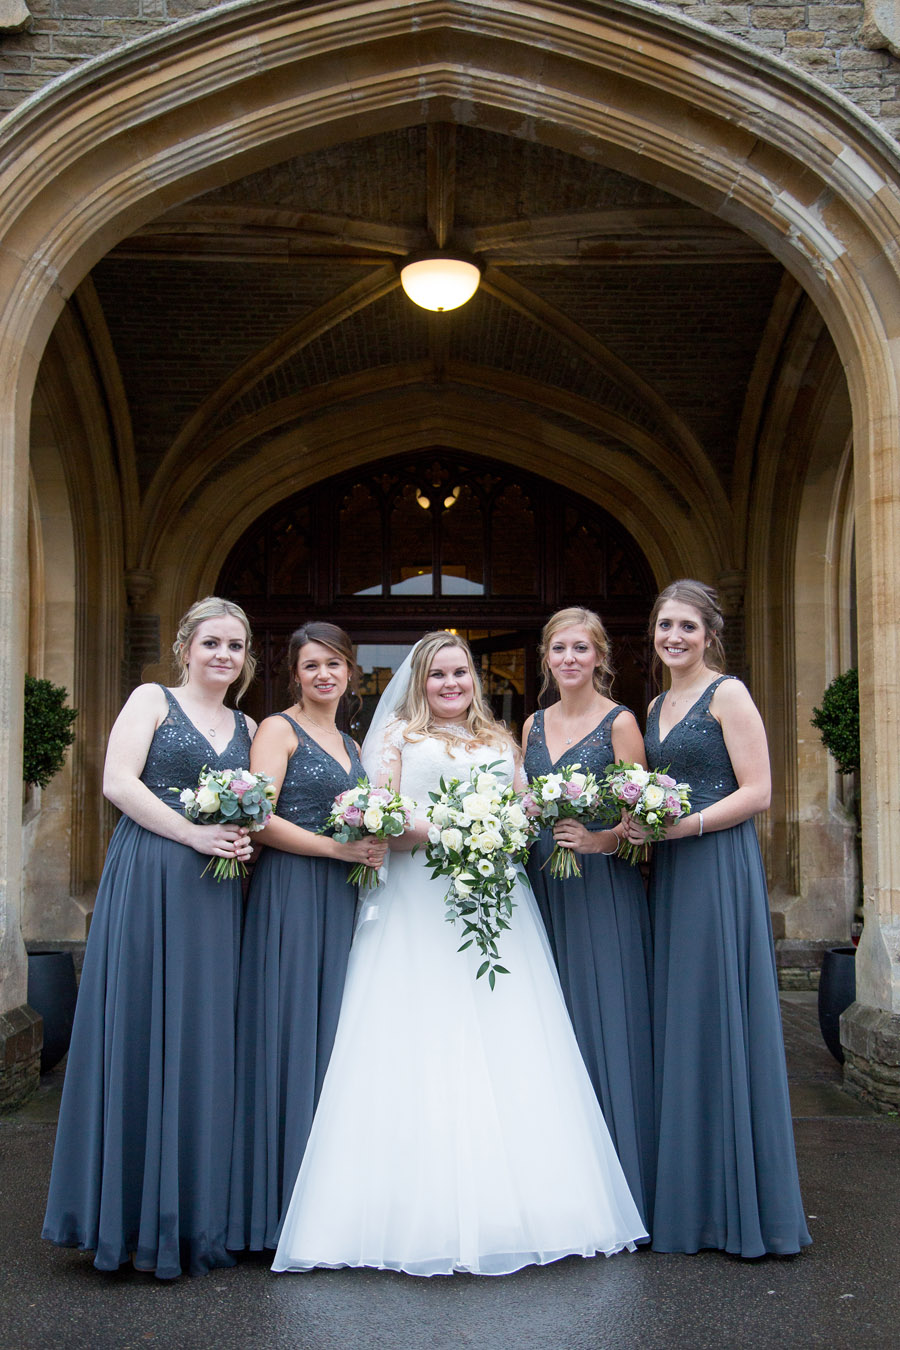 A magical winter wedding at Tortworth Court, images by Martin Dabek Photography (16)